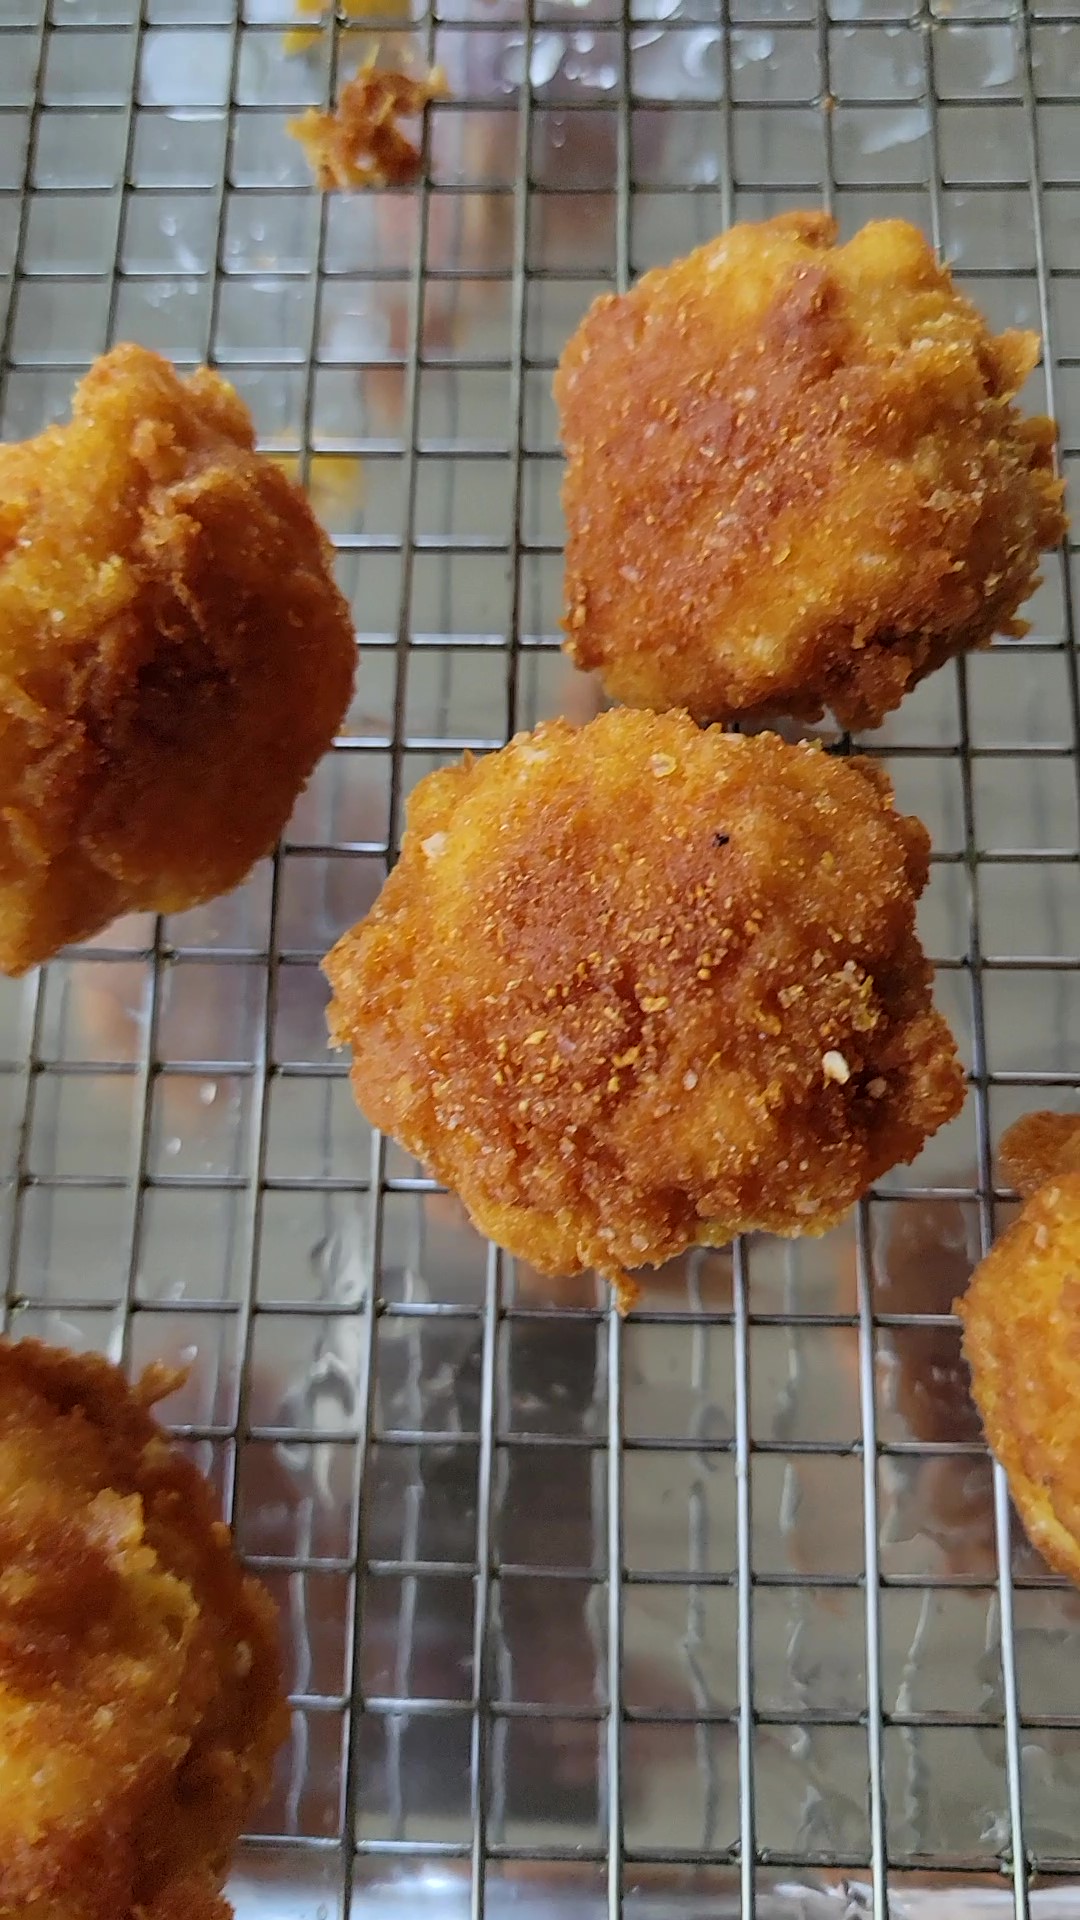 The finished Fried Mac and Cheese Balls set out to cool.